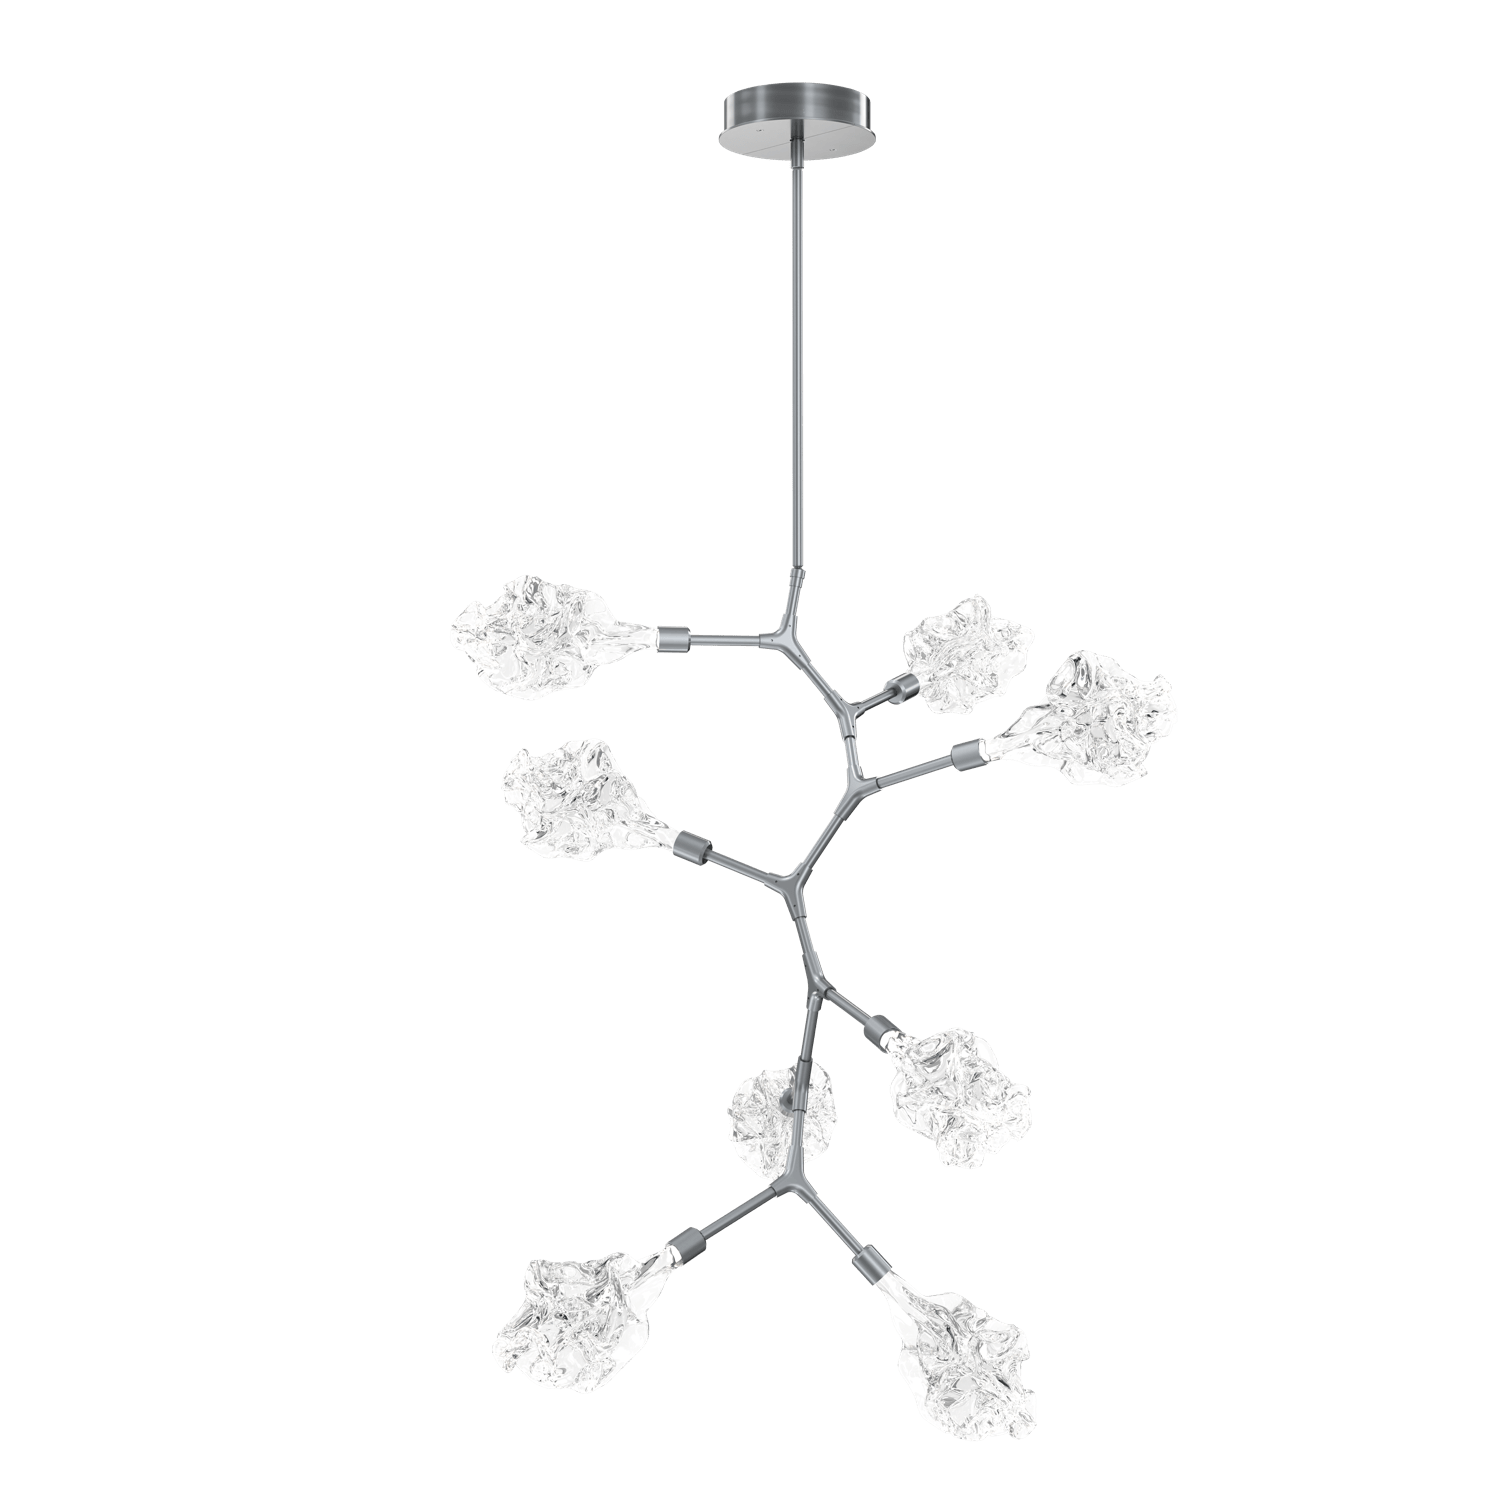 CHB0059-VB-GM-Hammerton-Studio-Blossom-8-light-organic-vine-chandelier-with-gunmetal-finish-and-clear-handblown-crystal-glass-shades-and-LED-lamping